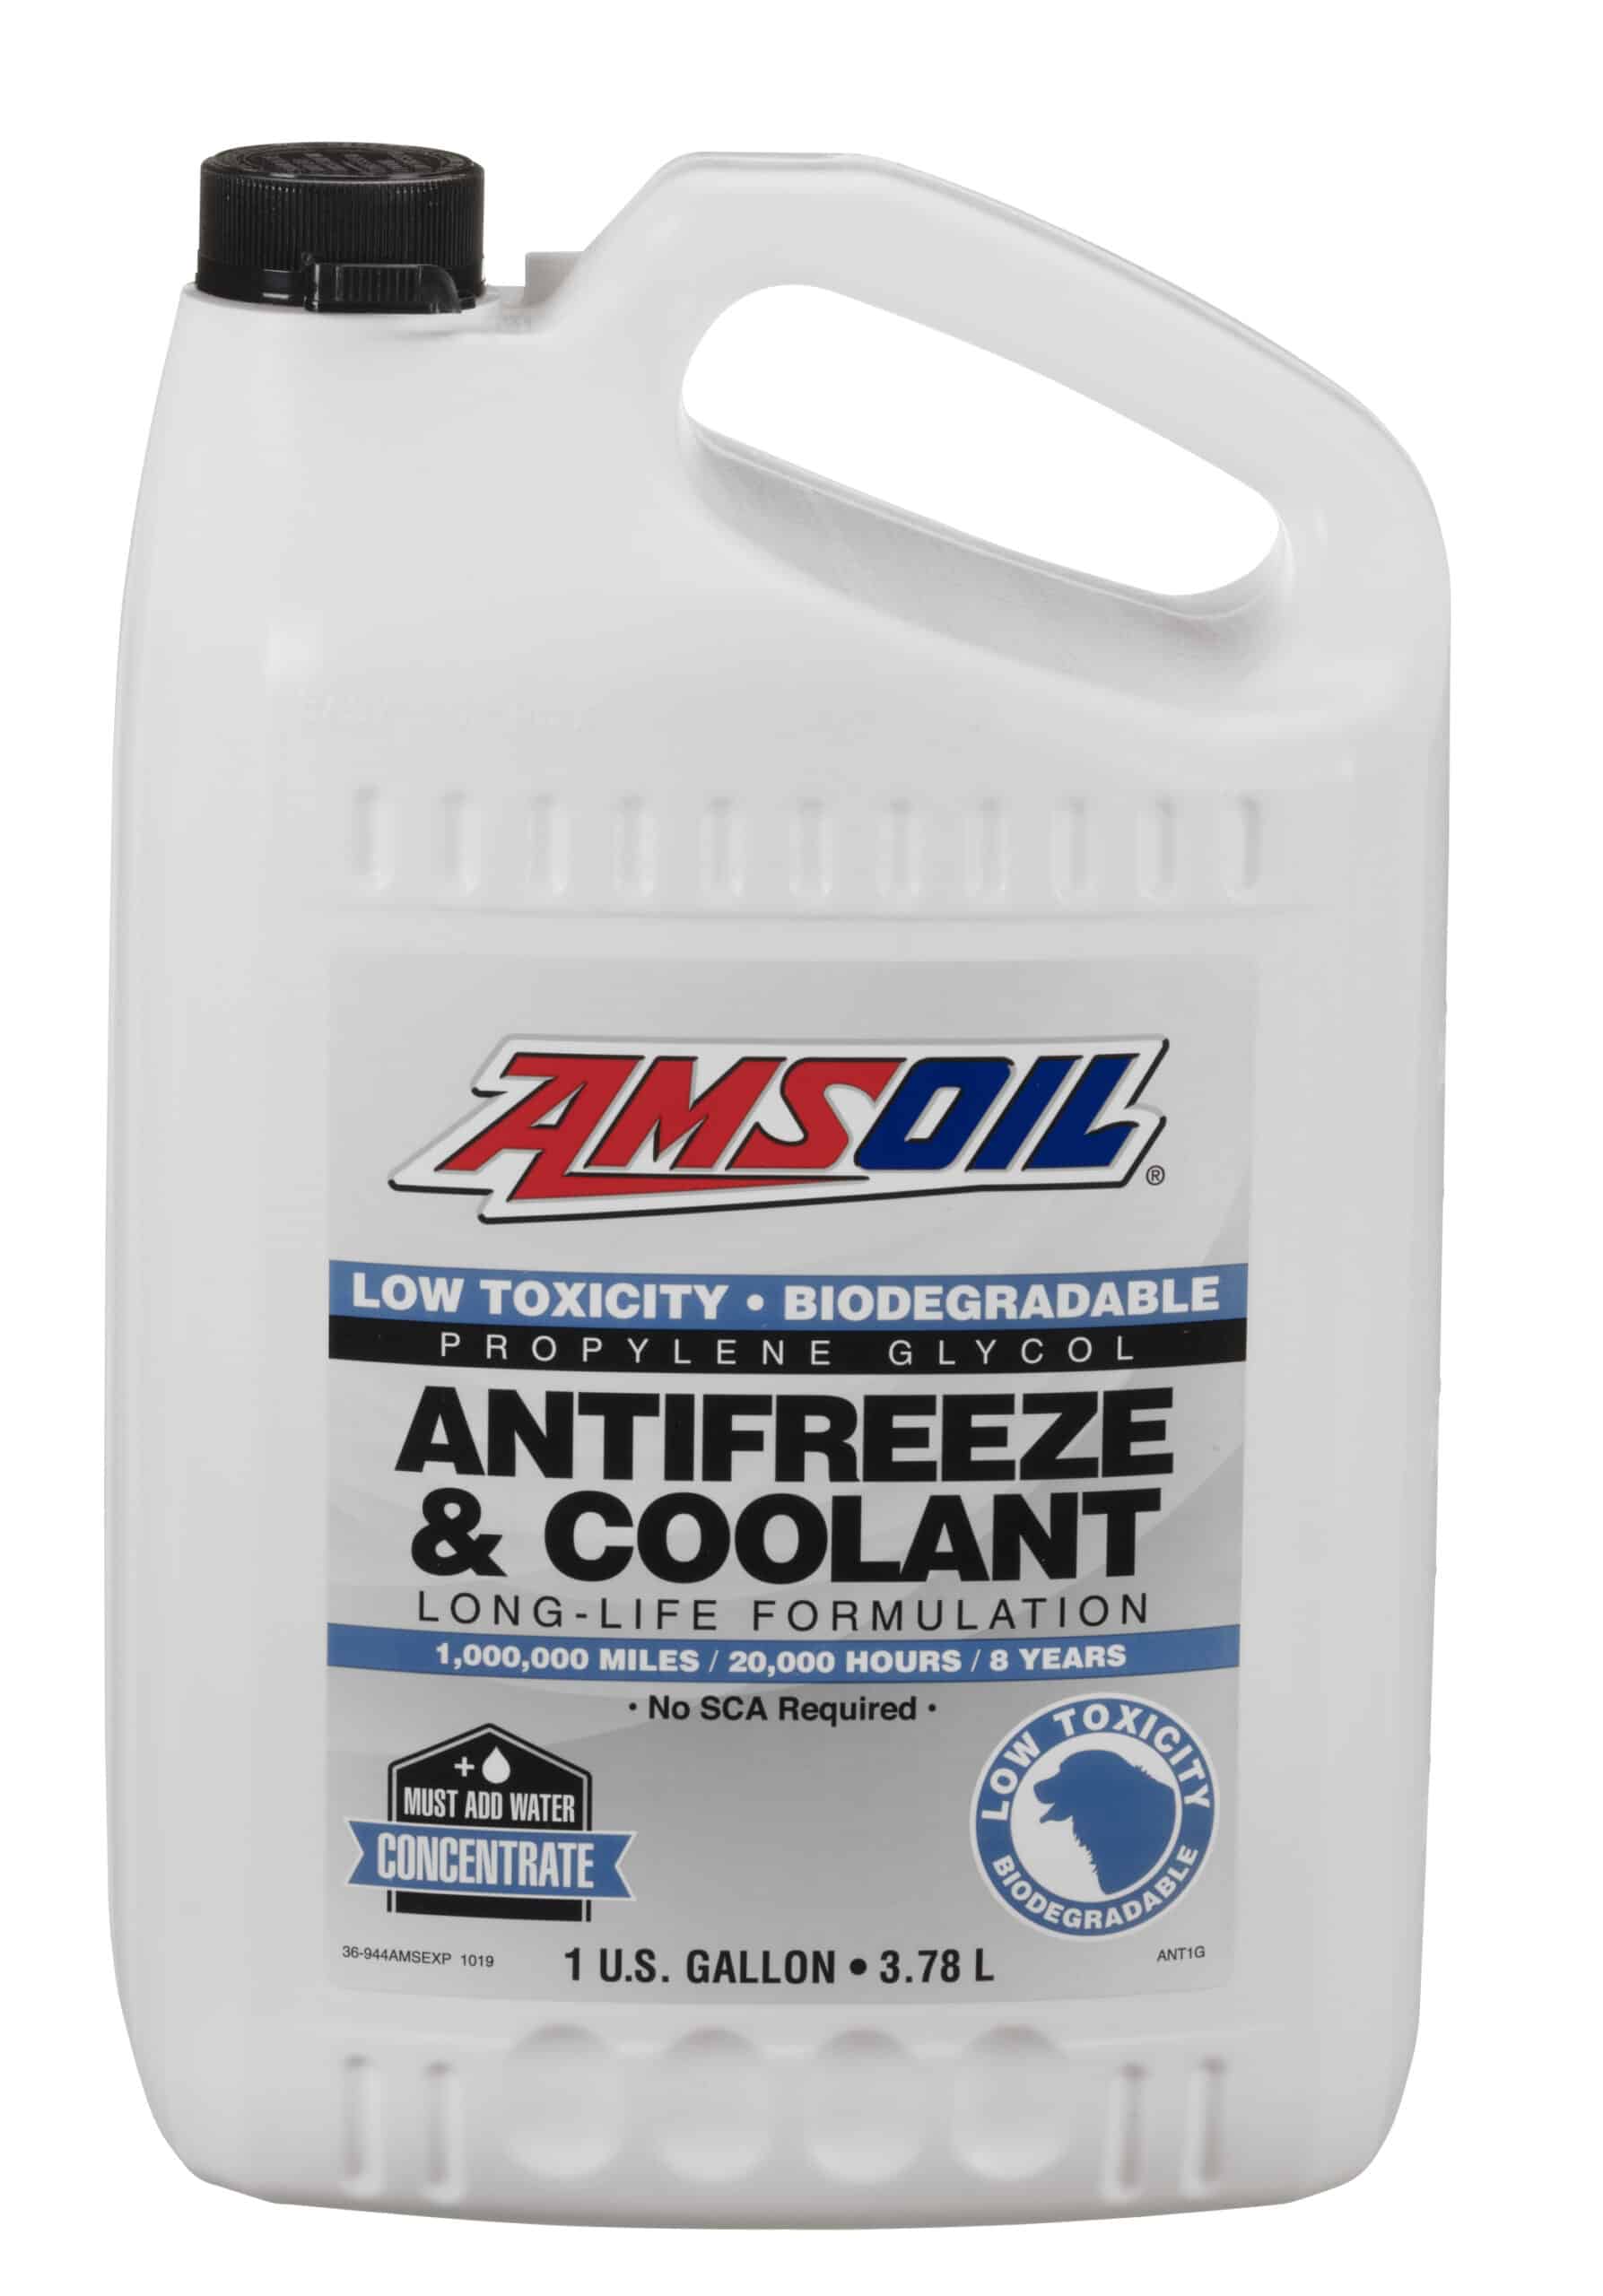 A gallon of AMSOIL Propylene Glycol Antifreeze & Coolant, which is formulated to provide benefits beyond those provided by conventional antifreeze & coolant products.